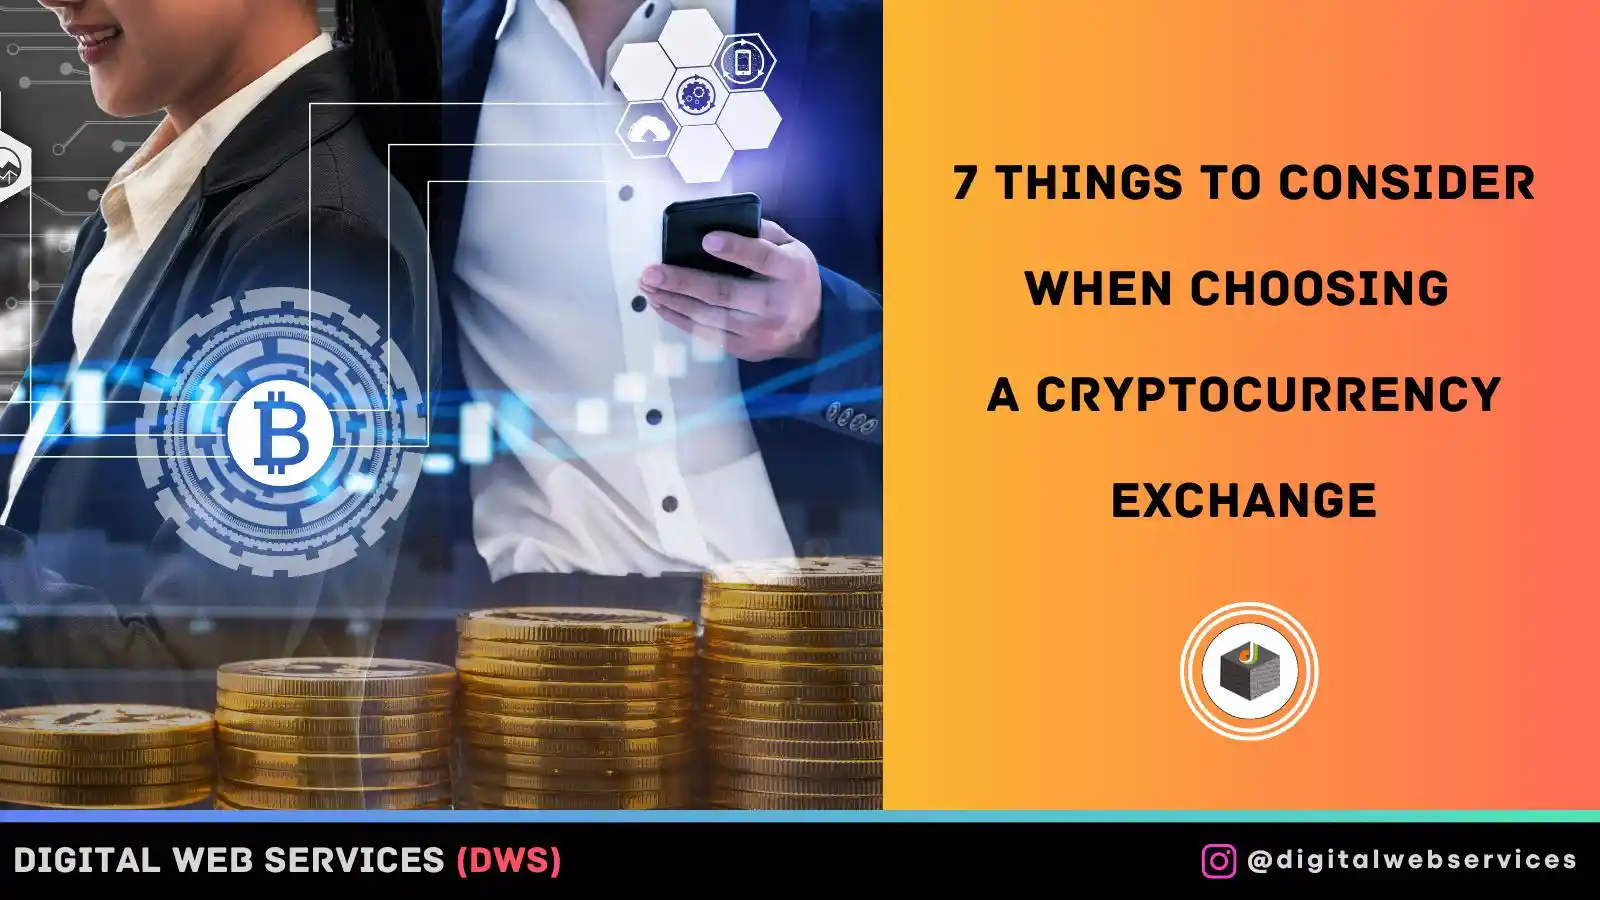 7 Things to Consider When Choosing A Cryptocurrency Exchange